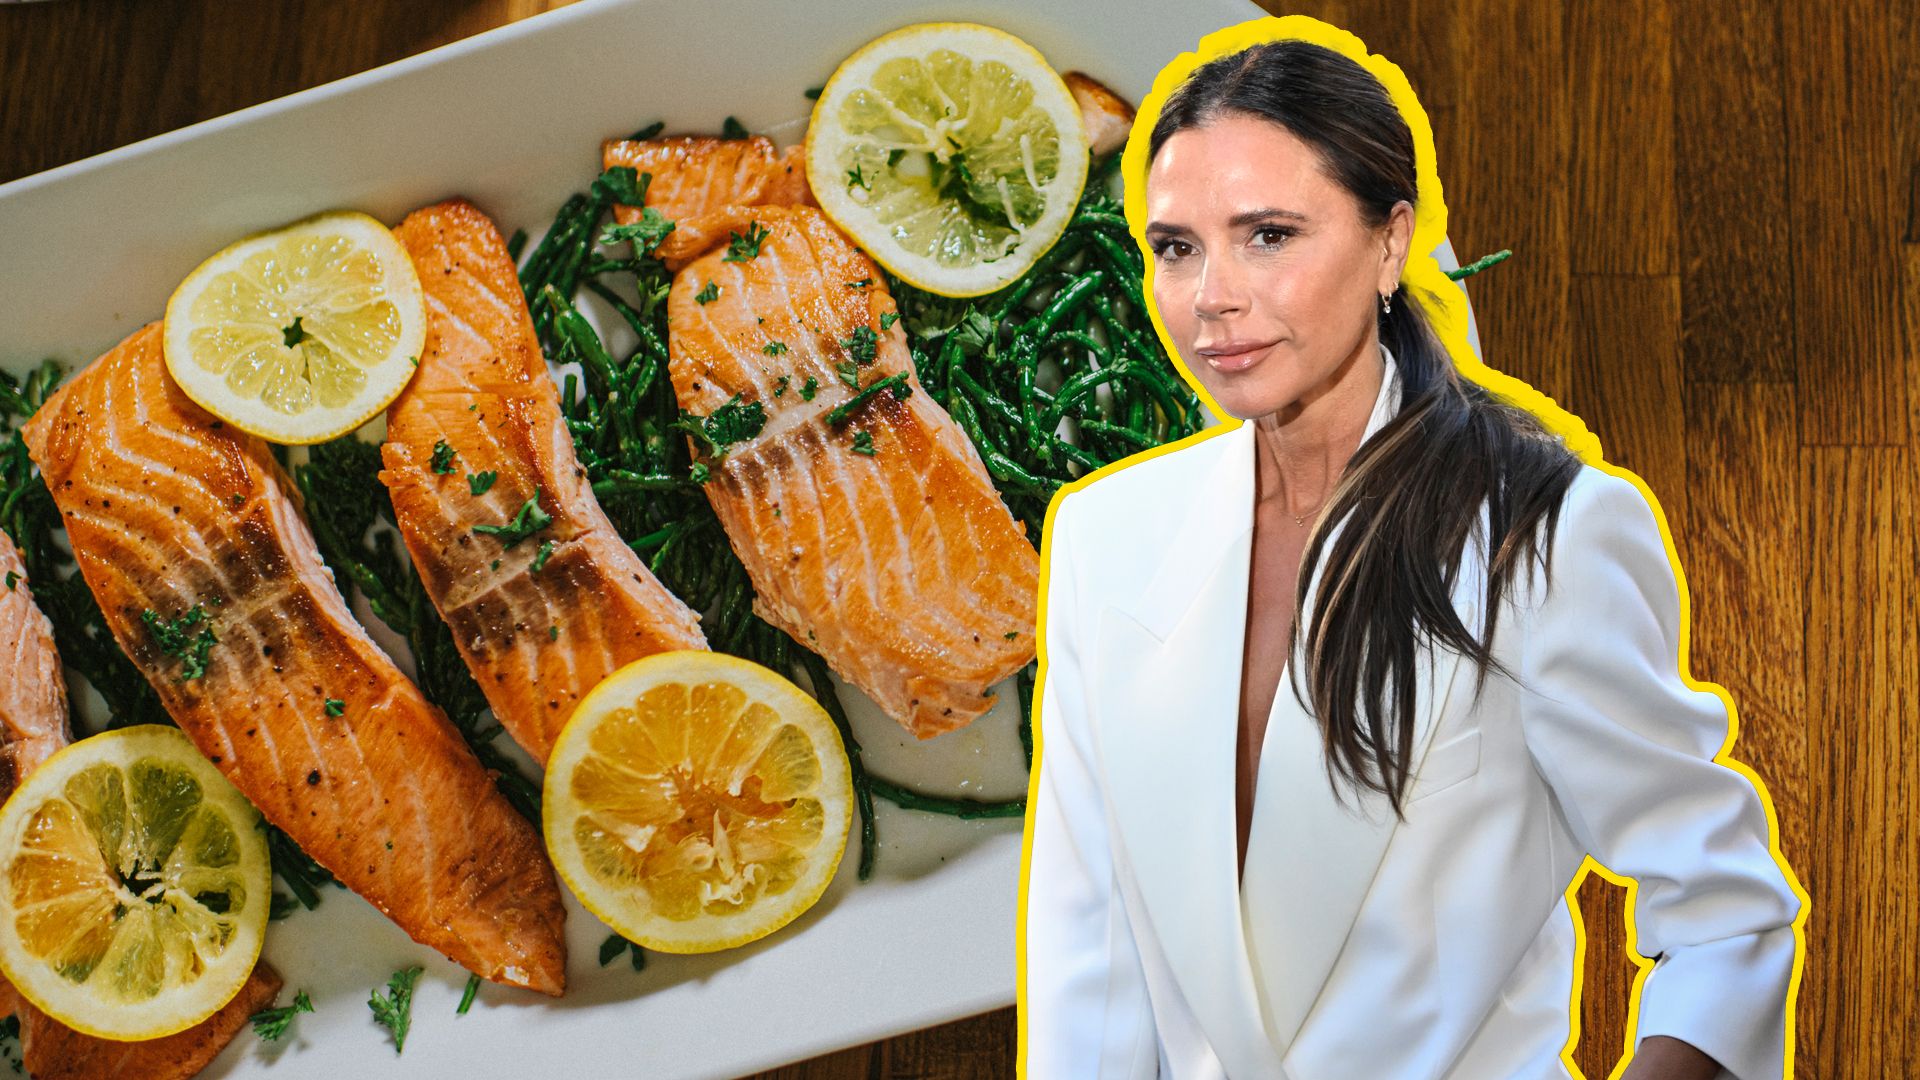 I followed Victoria Beckham's strict diet for a week - and spent £45 ...